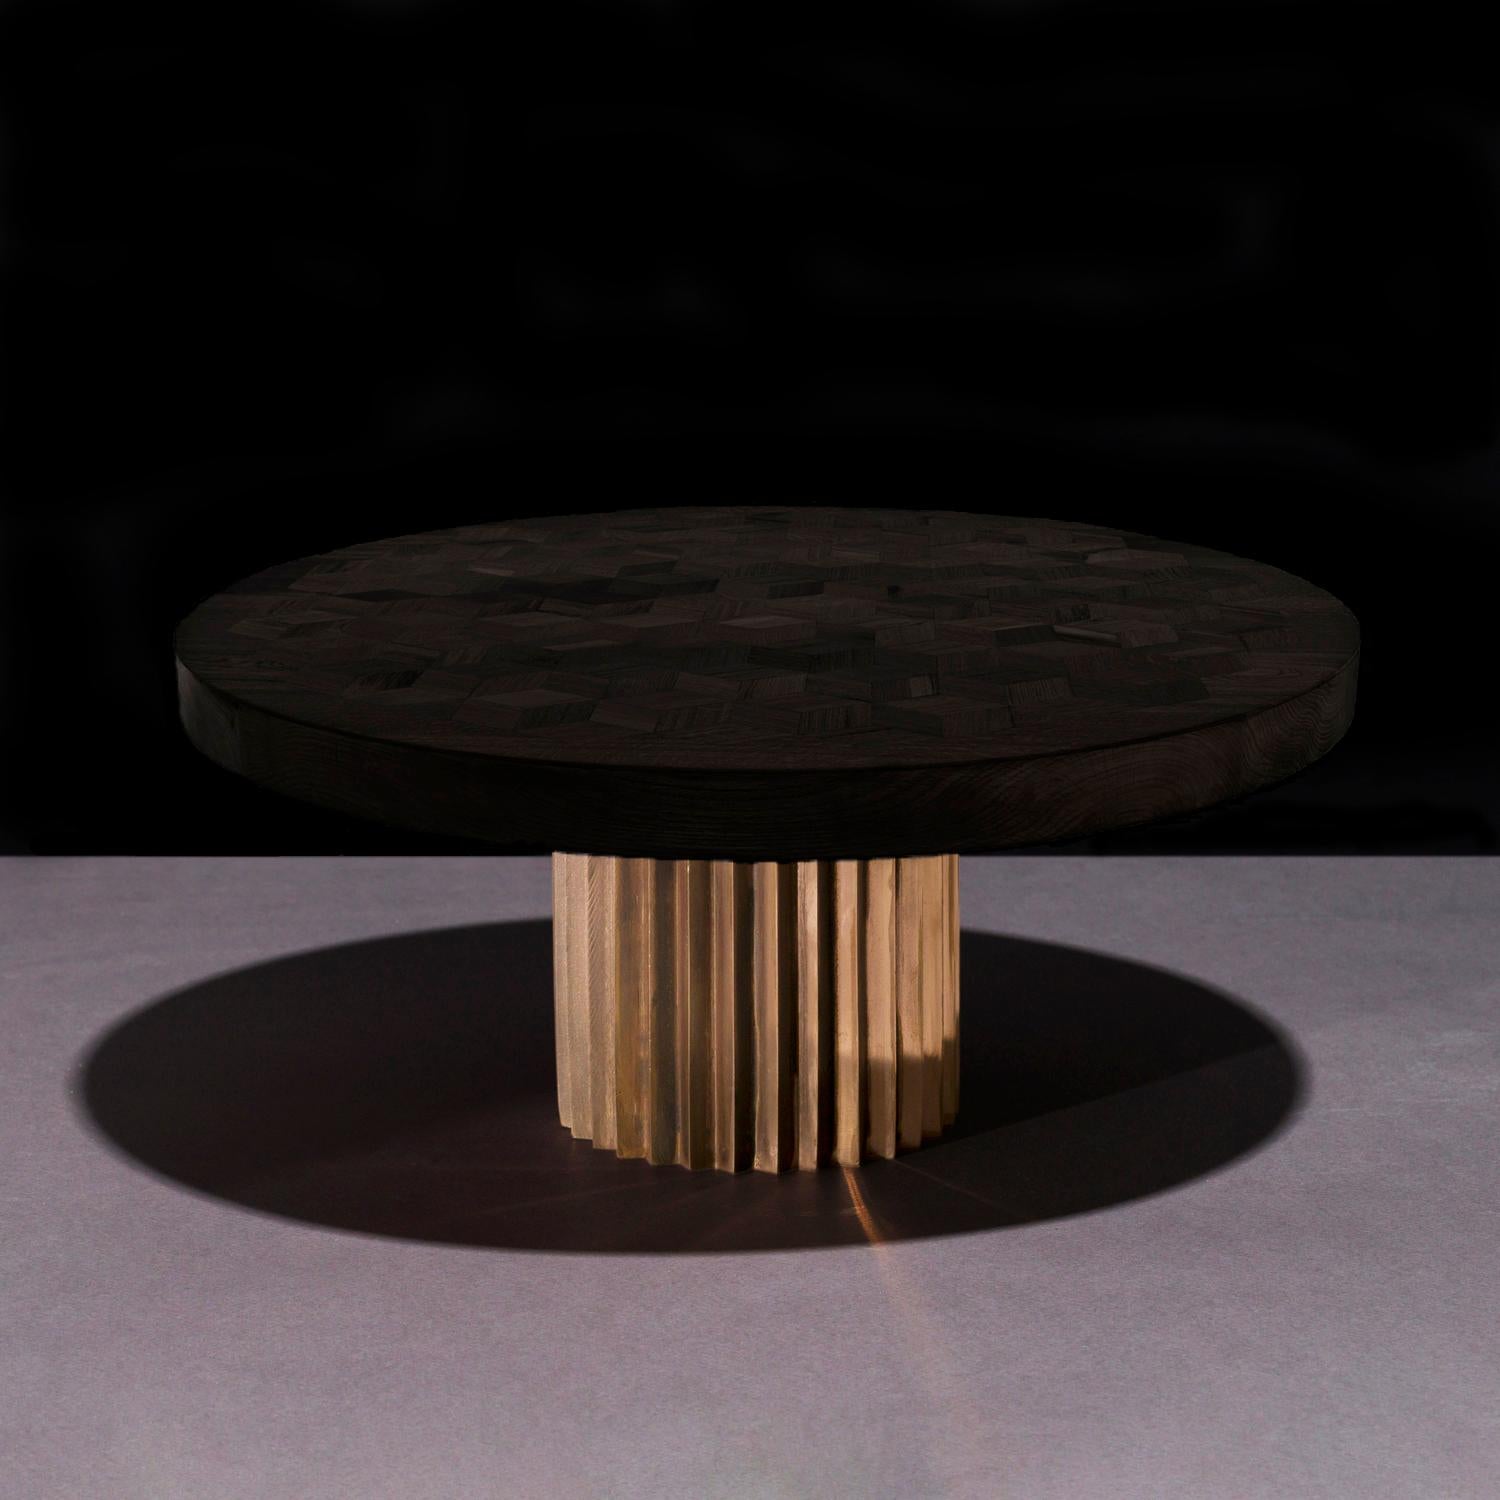 Doris Ebonized Oak Round Dining Table by Fred and Juul
Dimensions: Ø 160 x H 74 cm.
Materials: Bronze and reclaimed ebonized oak.

Available in round, oval and rectangular shapes. Also available in different materials. Custom sizes, materials or